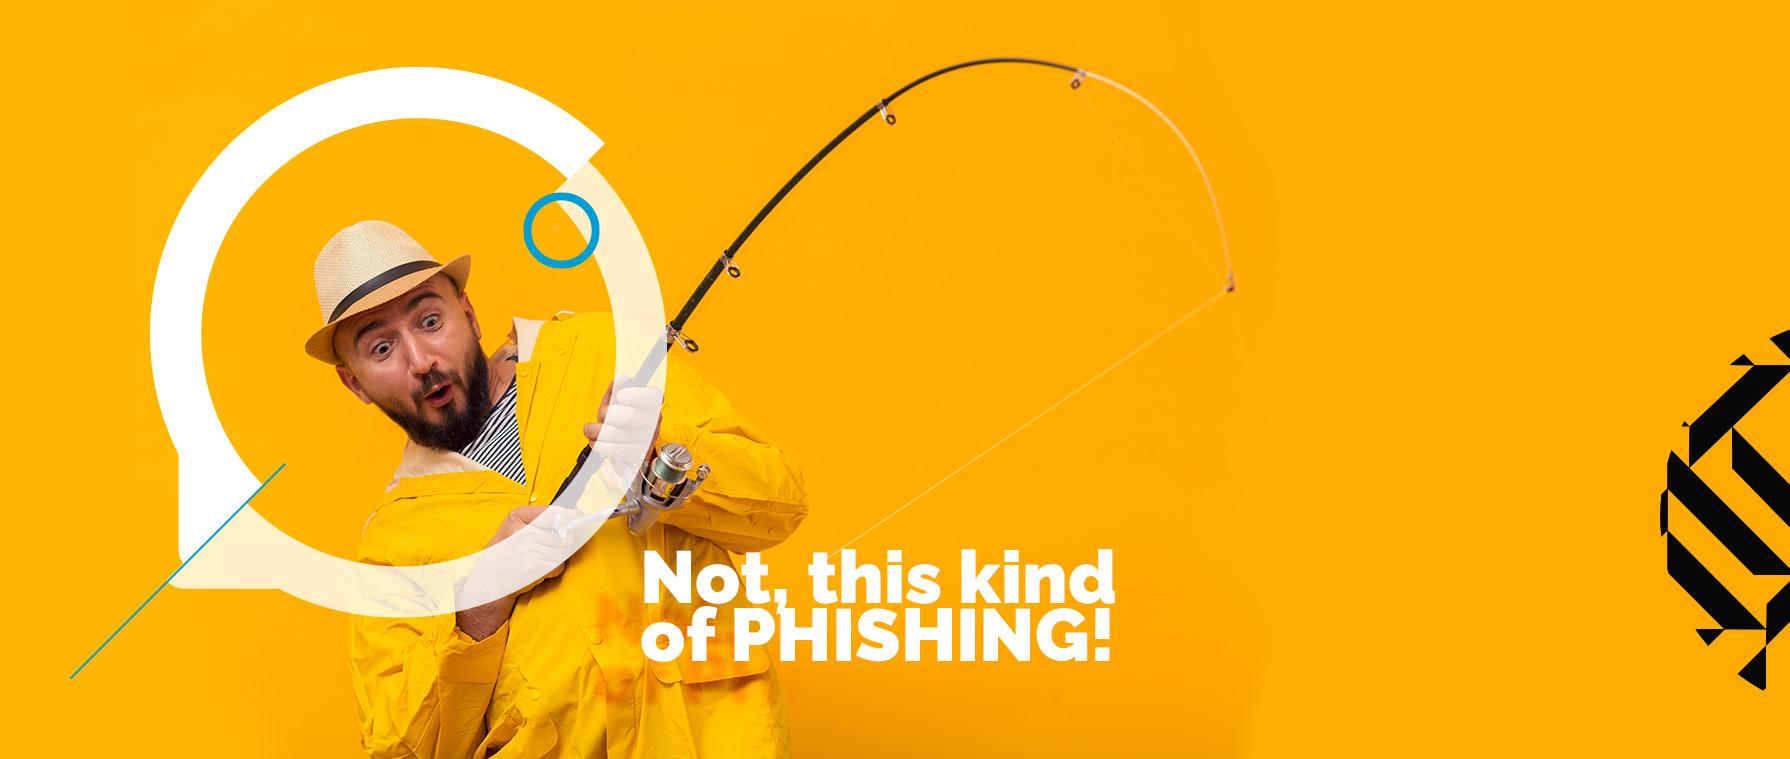 5 Types of Phishing Attacks and how to spot them